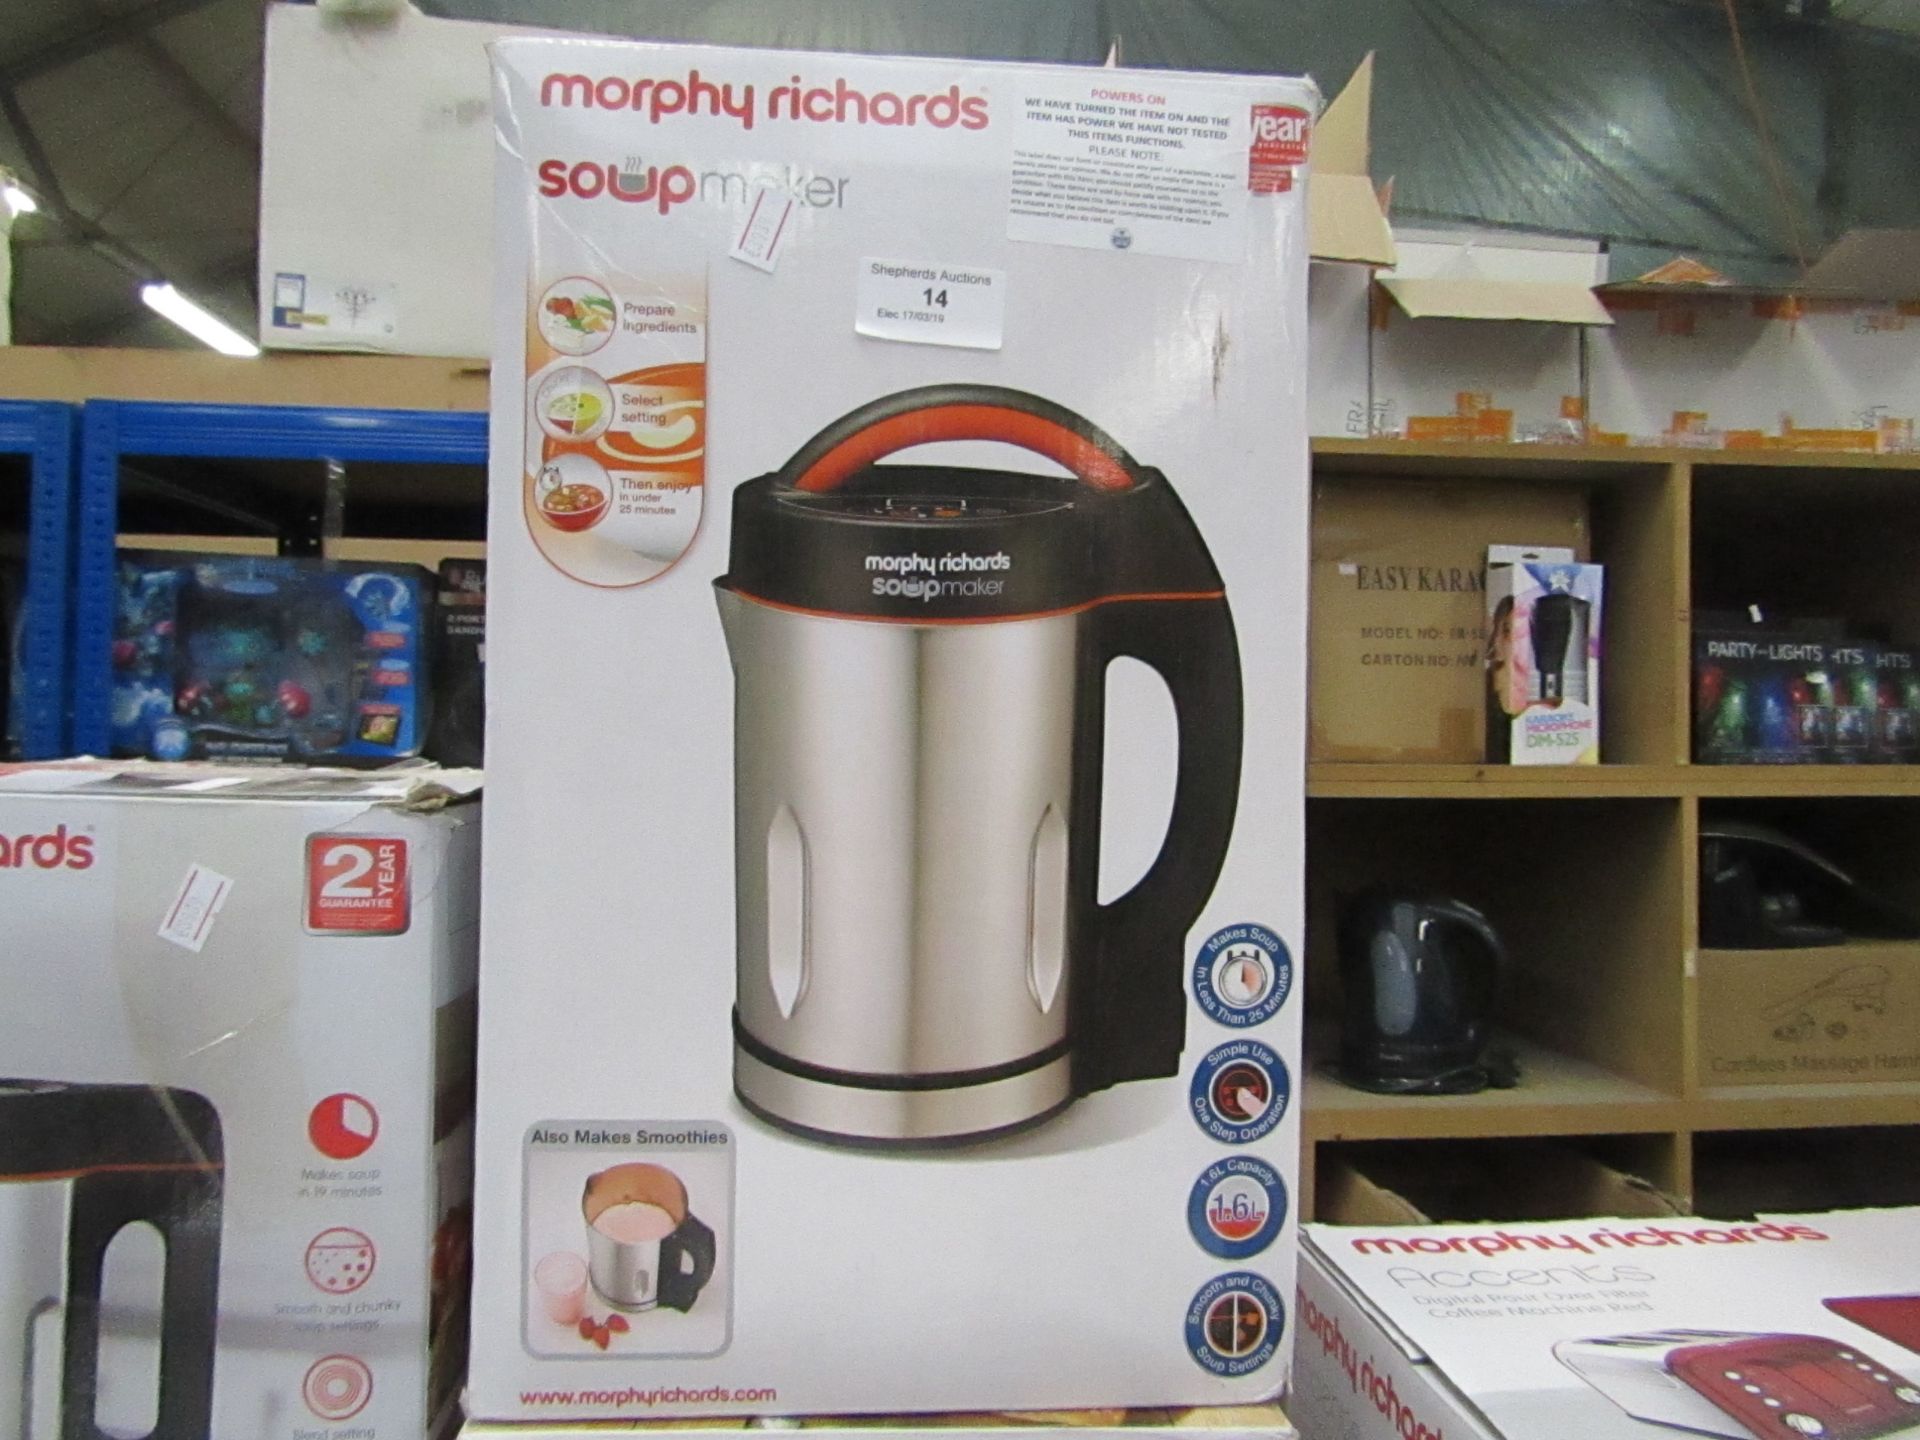 Morphy Richards soup maker and also makes smoothies powers on and boxed